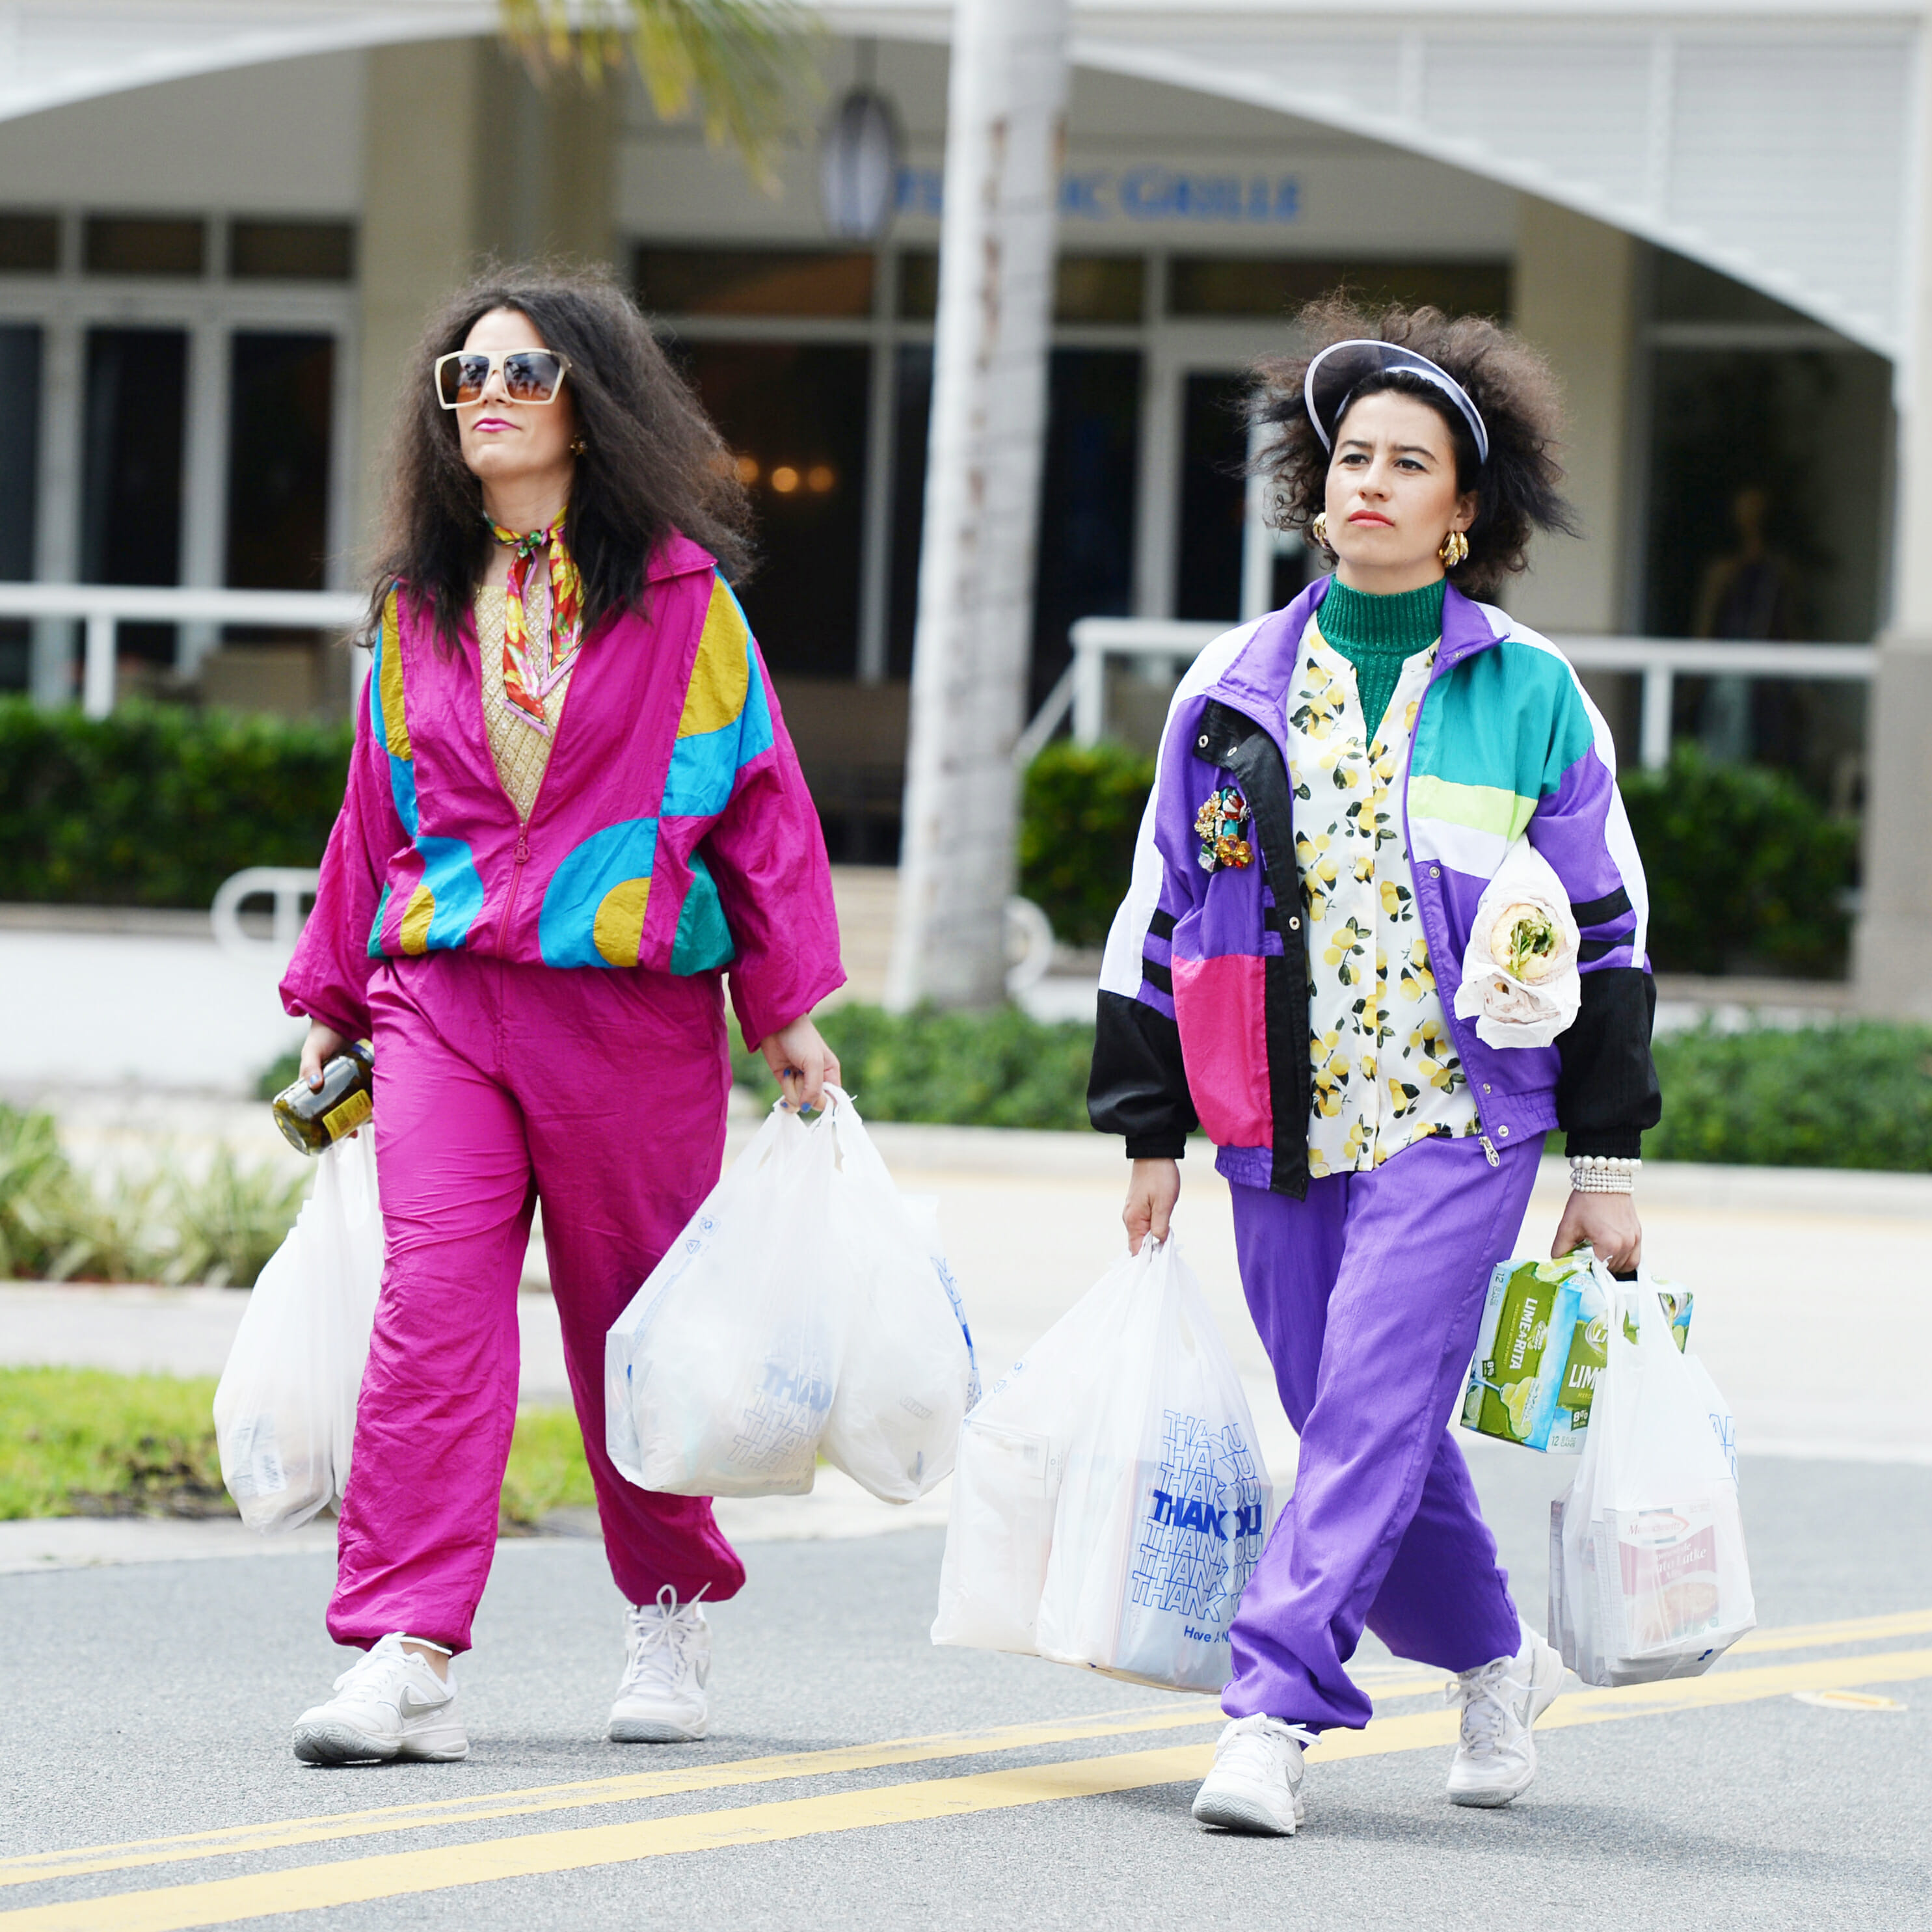 Two women dressed in colorful clothing march out of grocery store carrying many shopping bags in both their hands.